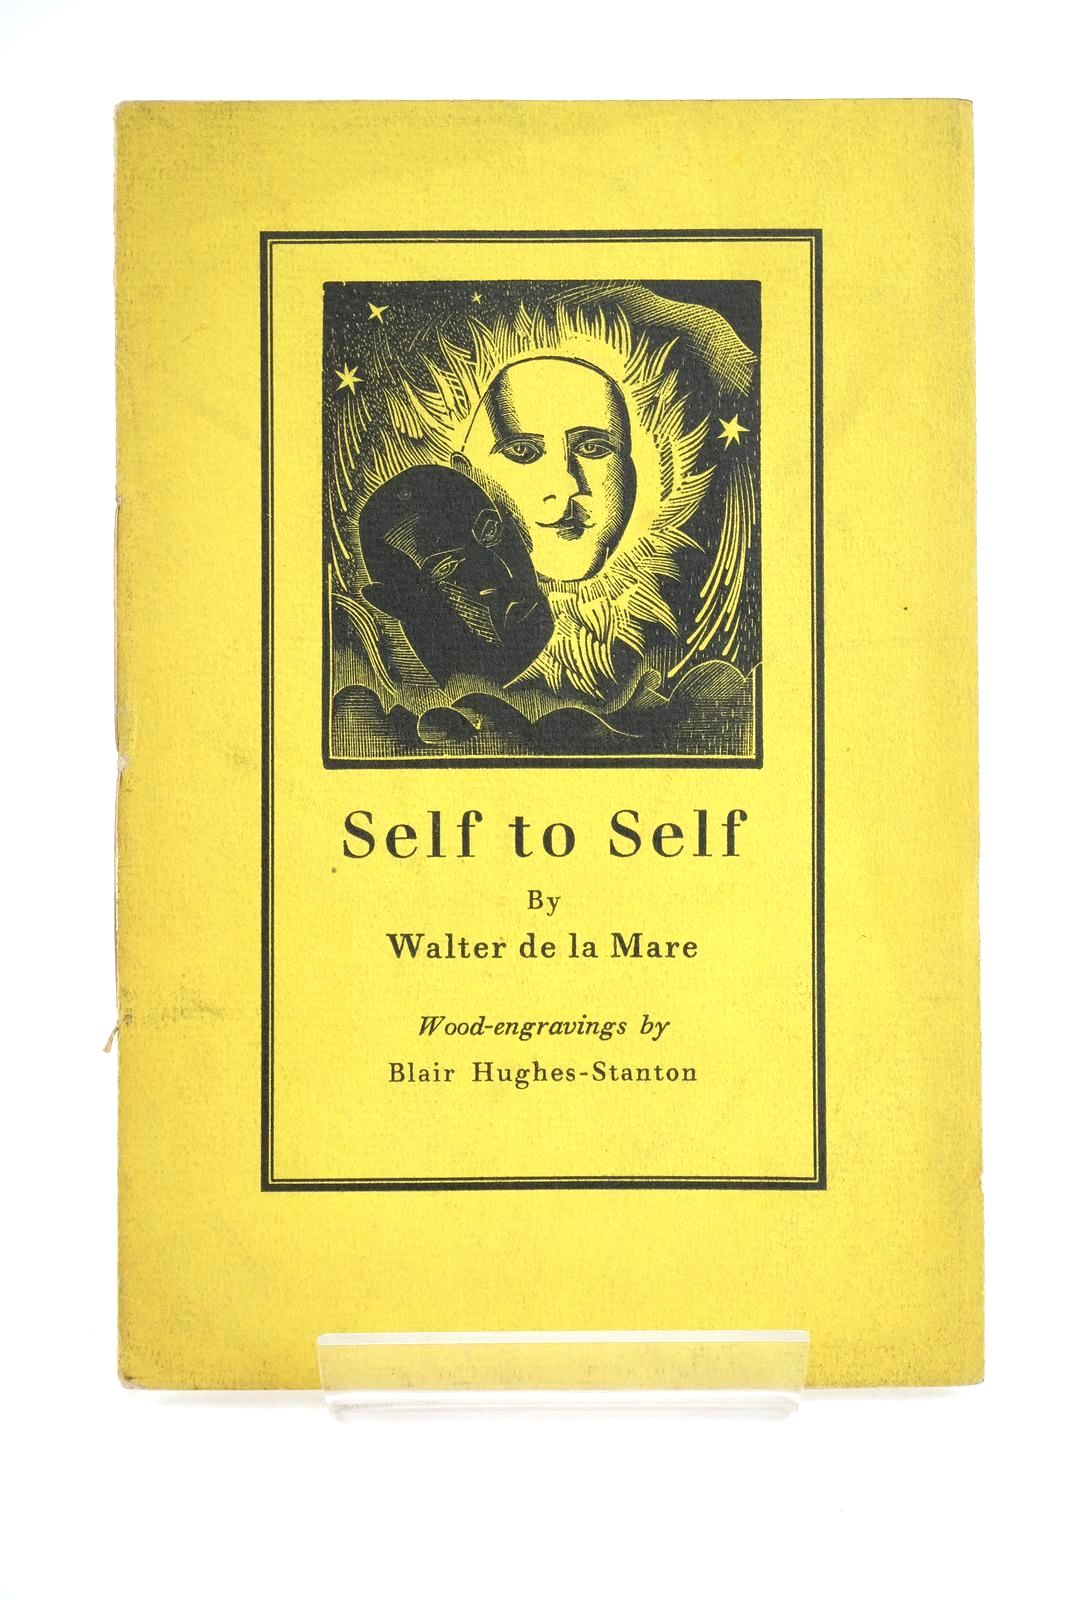 Photo of SELF TO SELF written by De La Mare, Walter illustrated by Hughes-Stanton, Blair published by Faber and Gwyer, Ltd. (STOCK CODE: 1323826)  for sale by Stella & Rose's Books